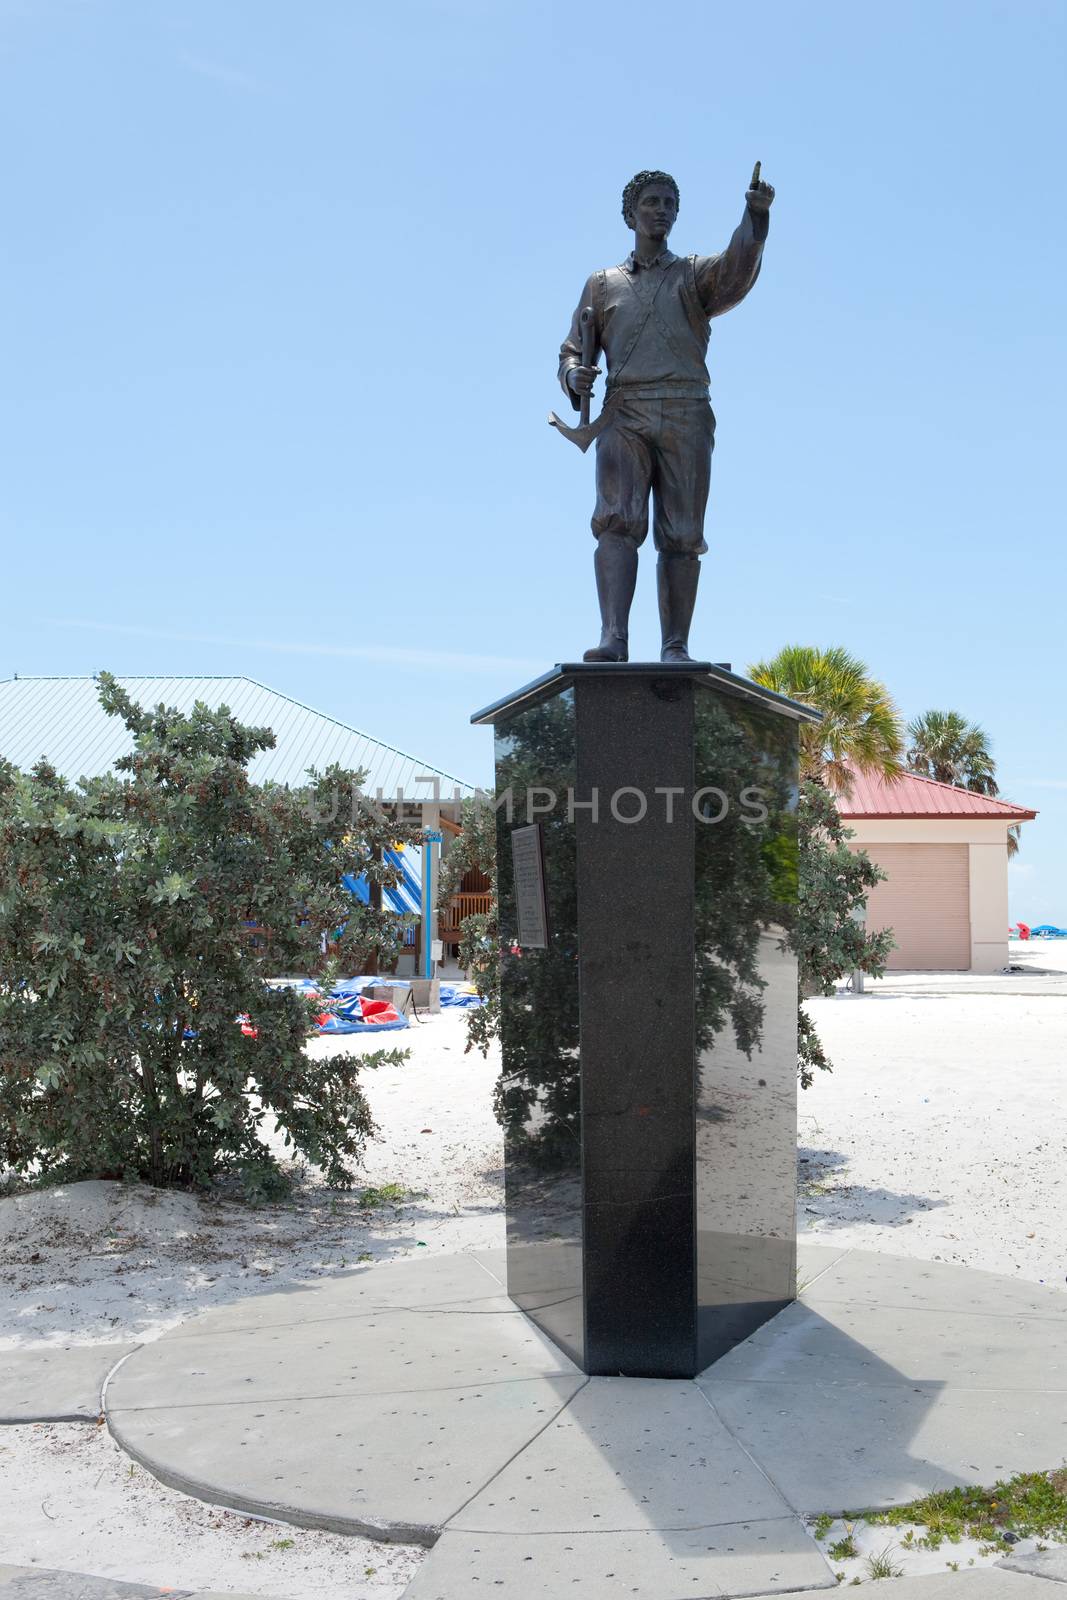 First Greel in America Theodoros Griego public statue in Clearwater Florida.